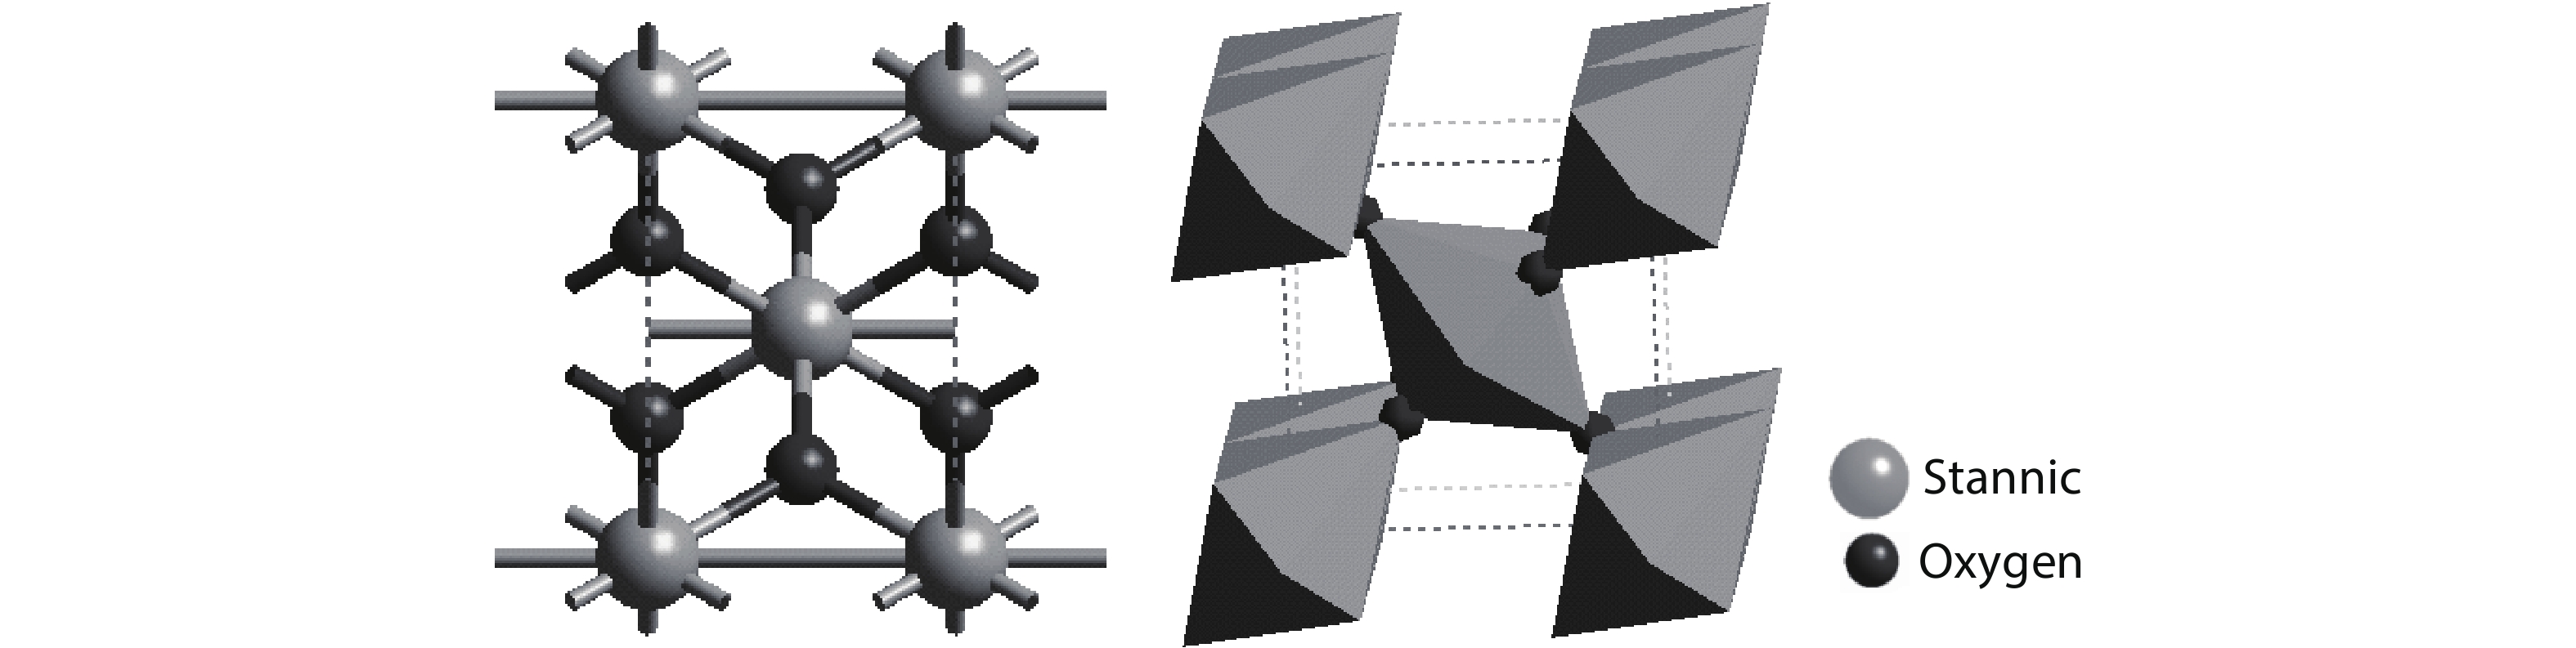 Crystal structure and coordination polyhedron of the stannic oxide (cassiterite).